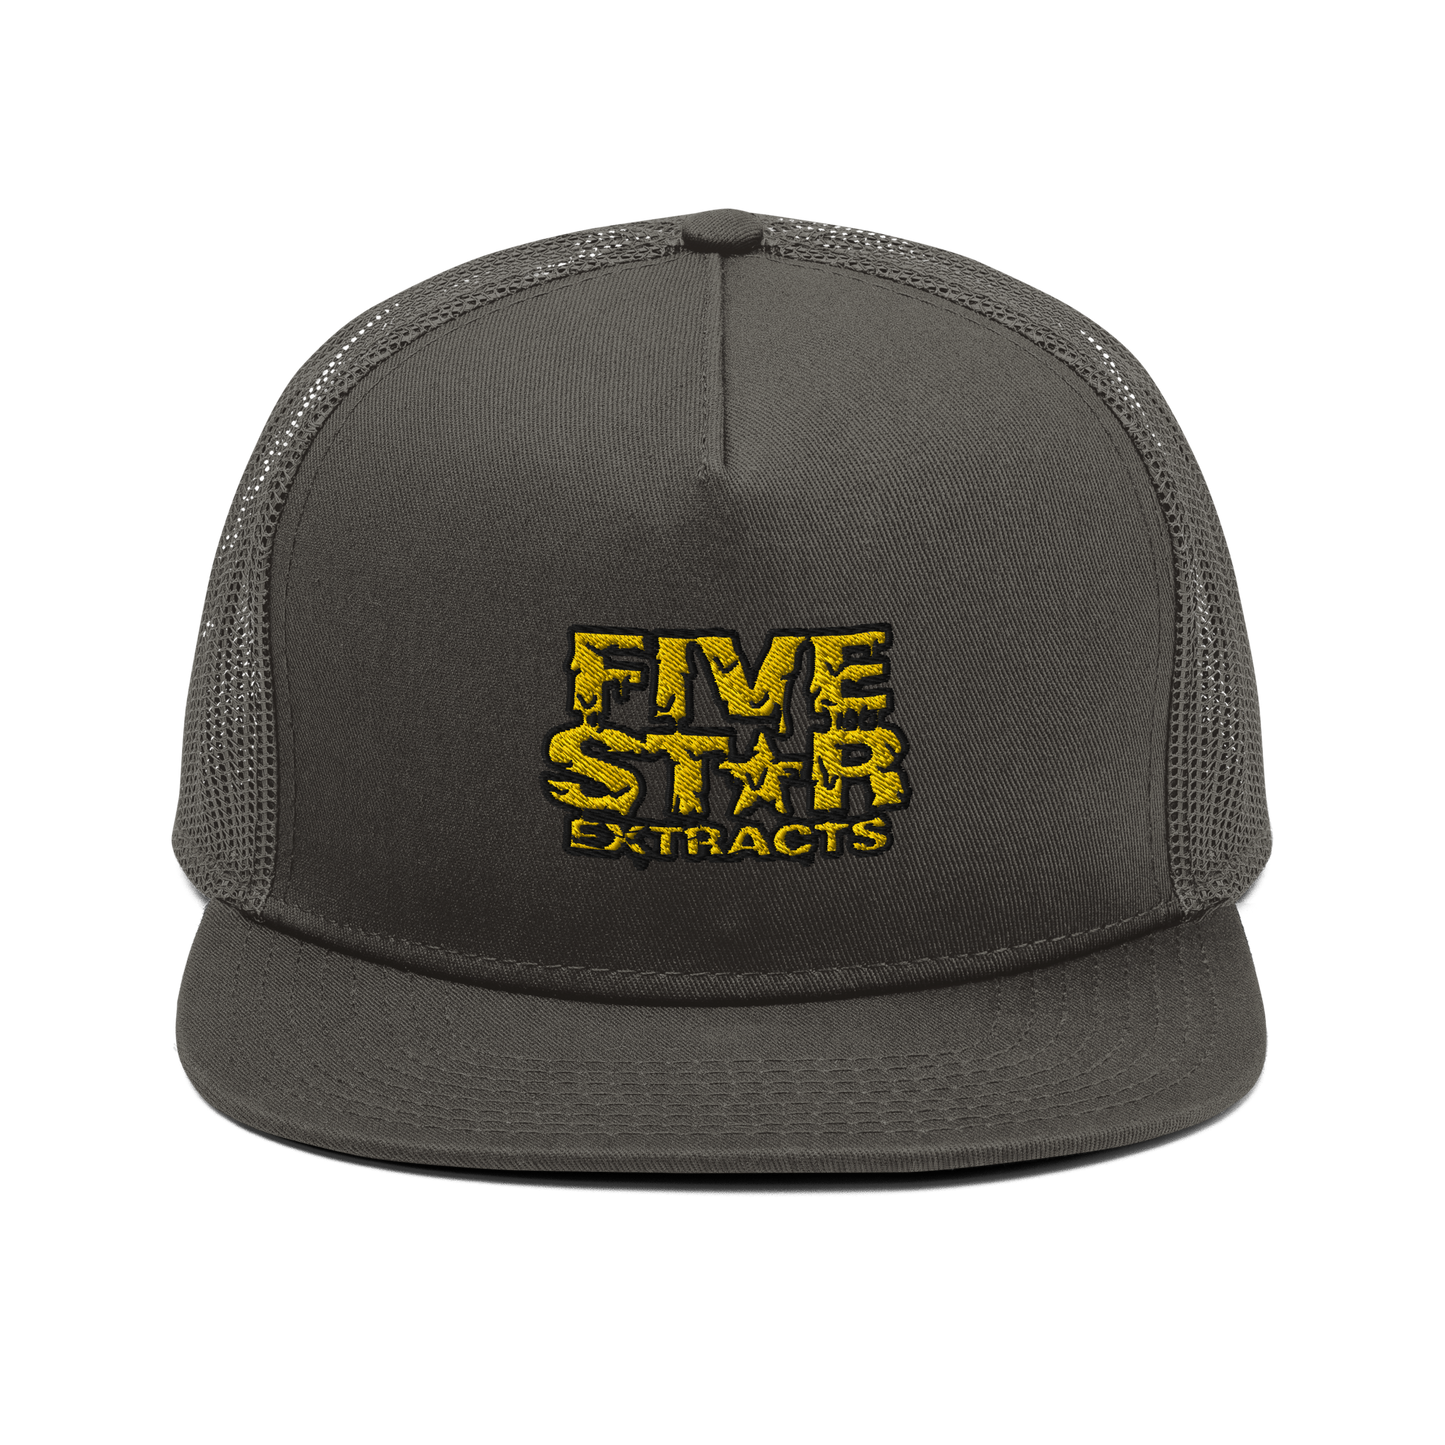 Five Star Extracts Mesh Back Snapback